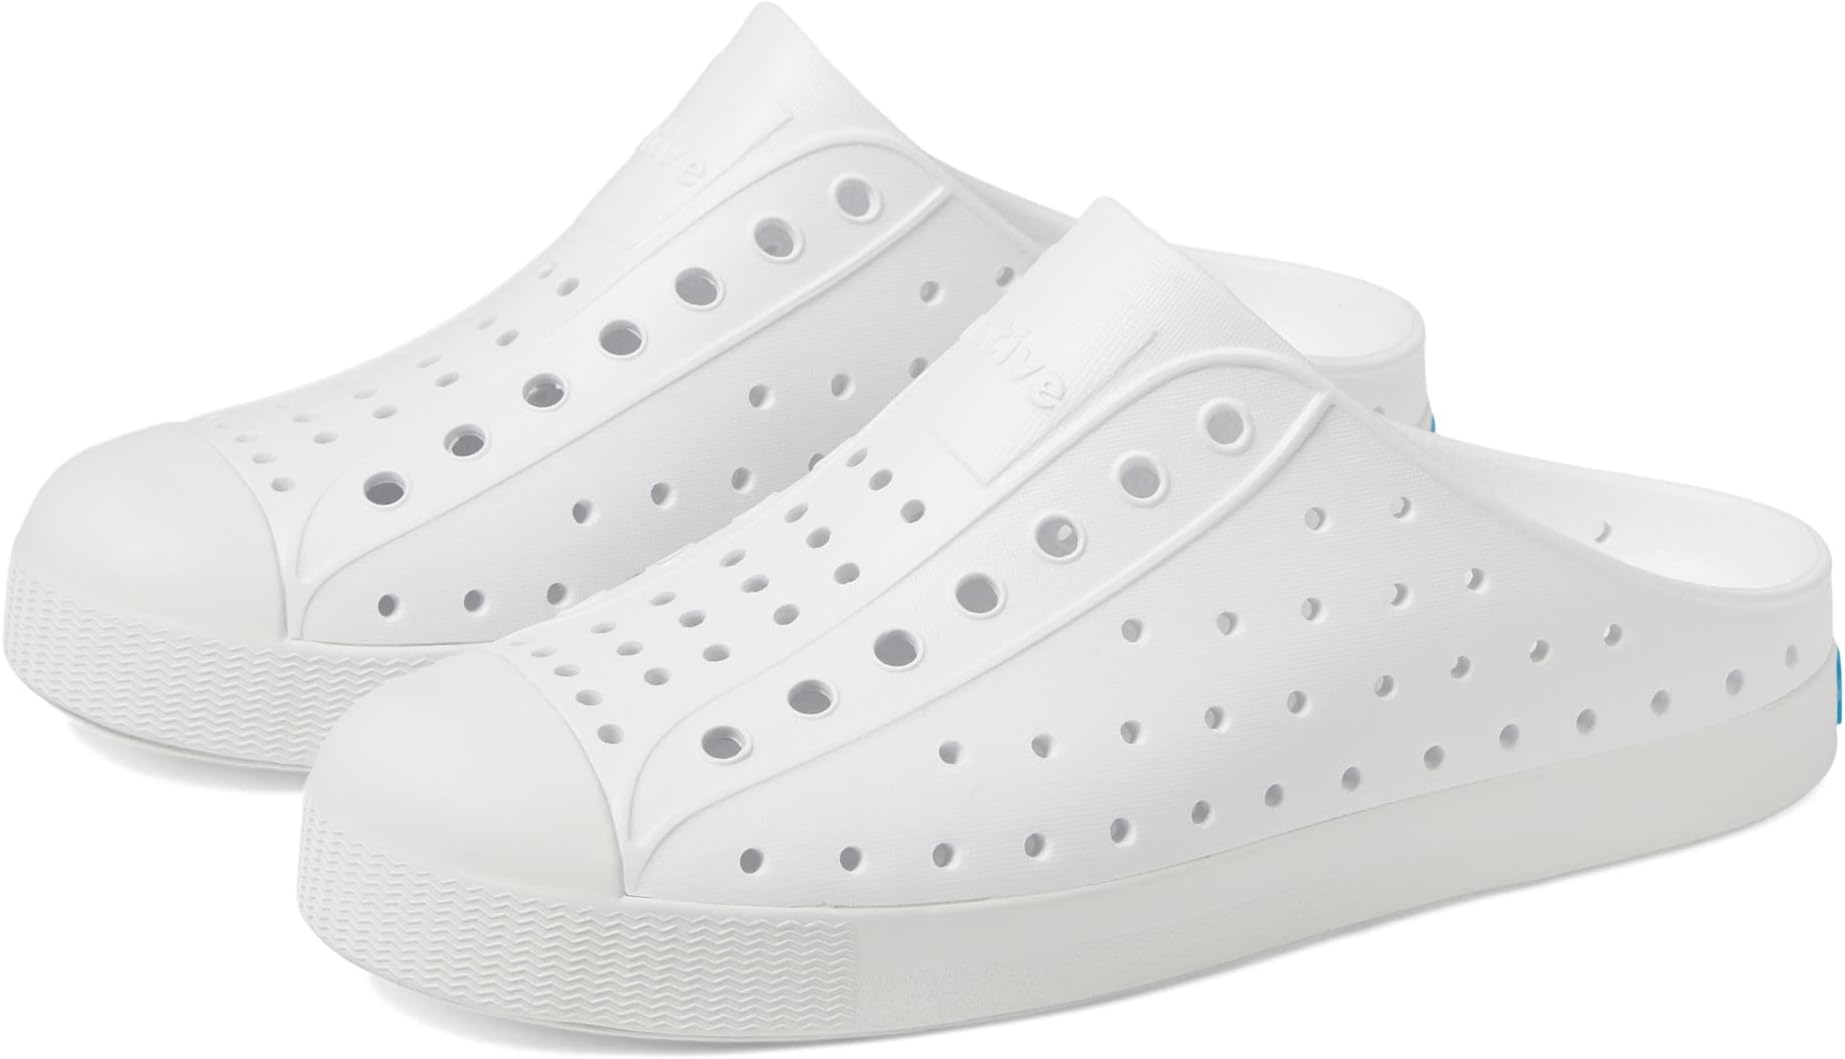 Кроссовки Jefferson Sugarlite Clog Native Shoes Kids, цвет Shell White/Shell White 2022 women little white shoes light soft sneakers ladies students casual walking shoes shell head sport shoes skateboard shoes